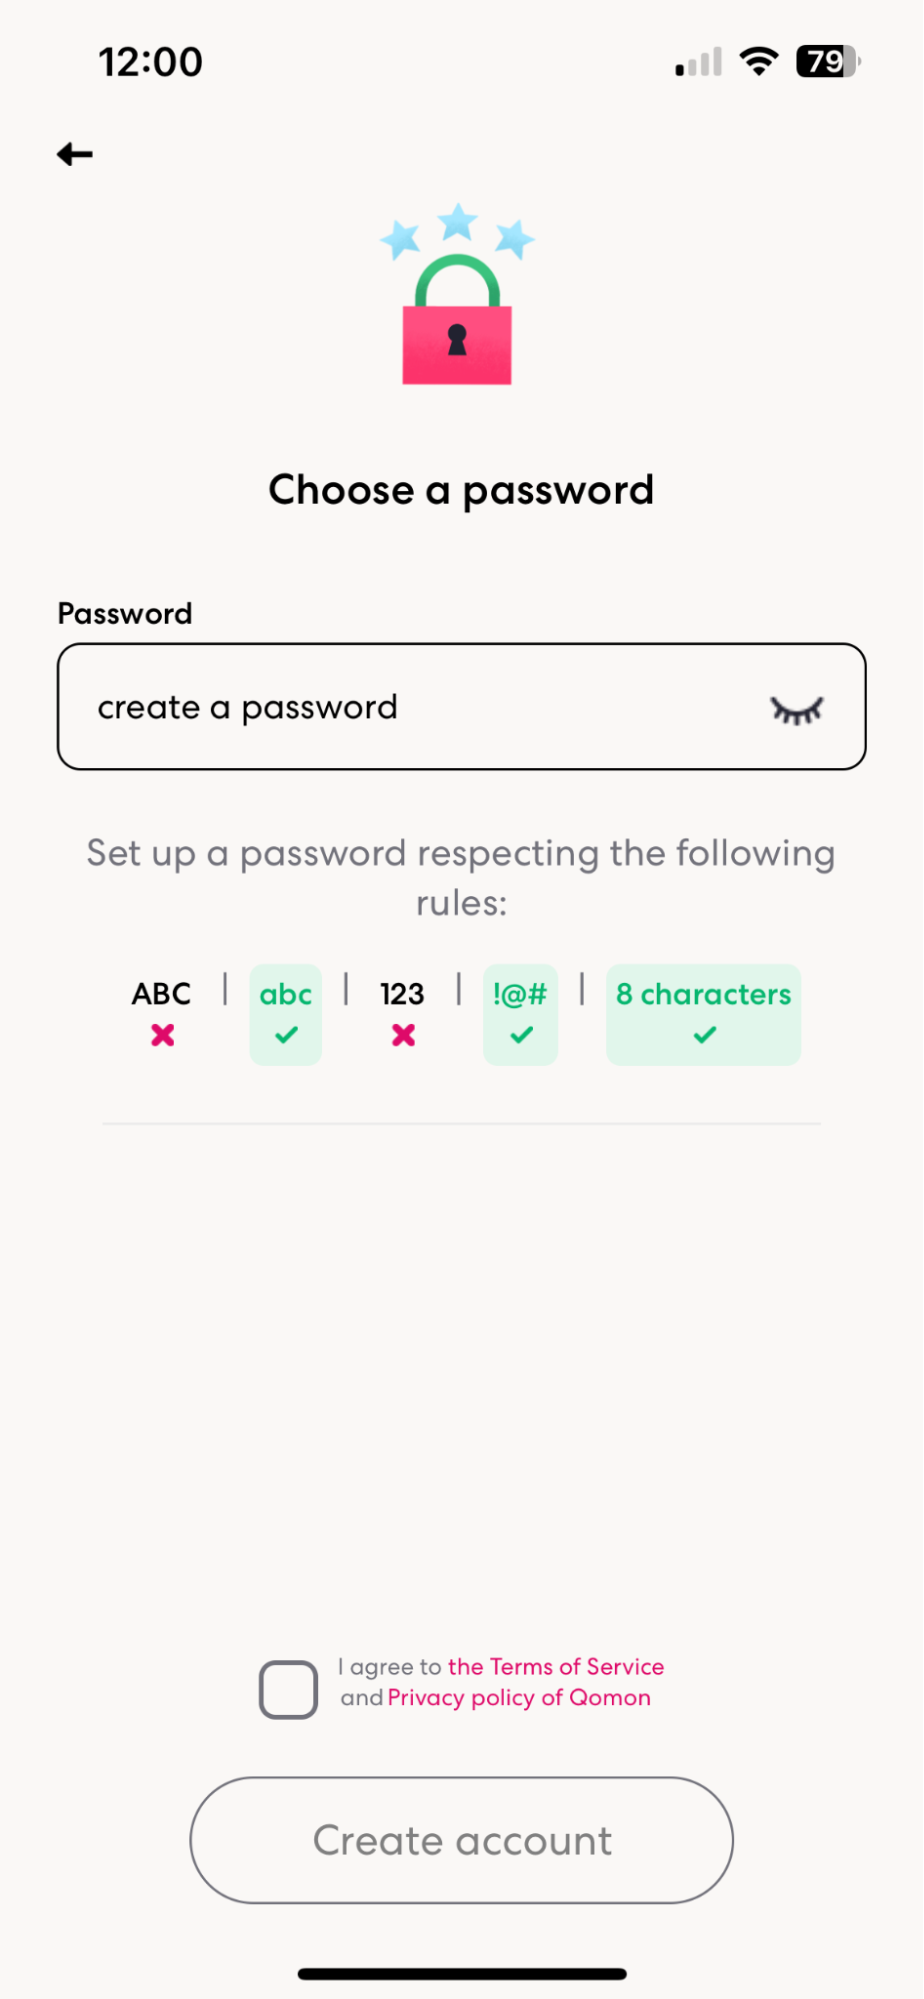 Screenshot from the climate vote app showing password entry